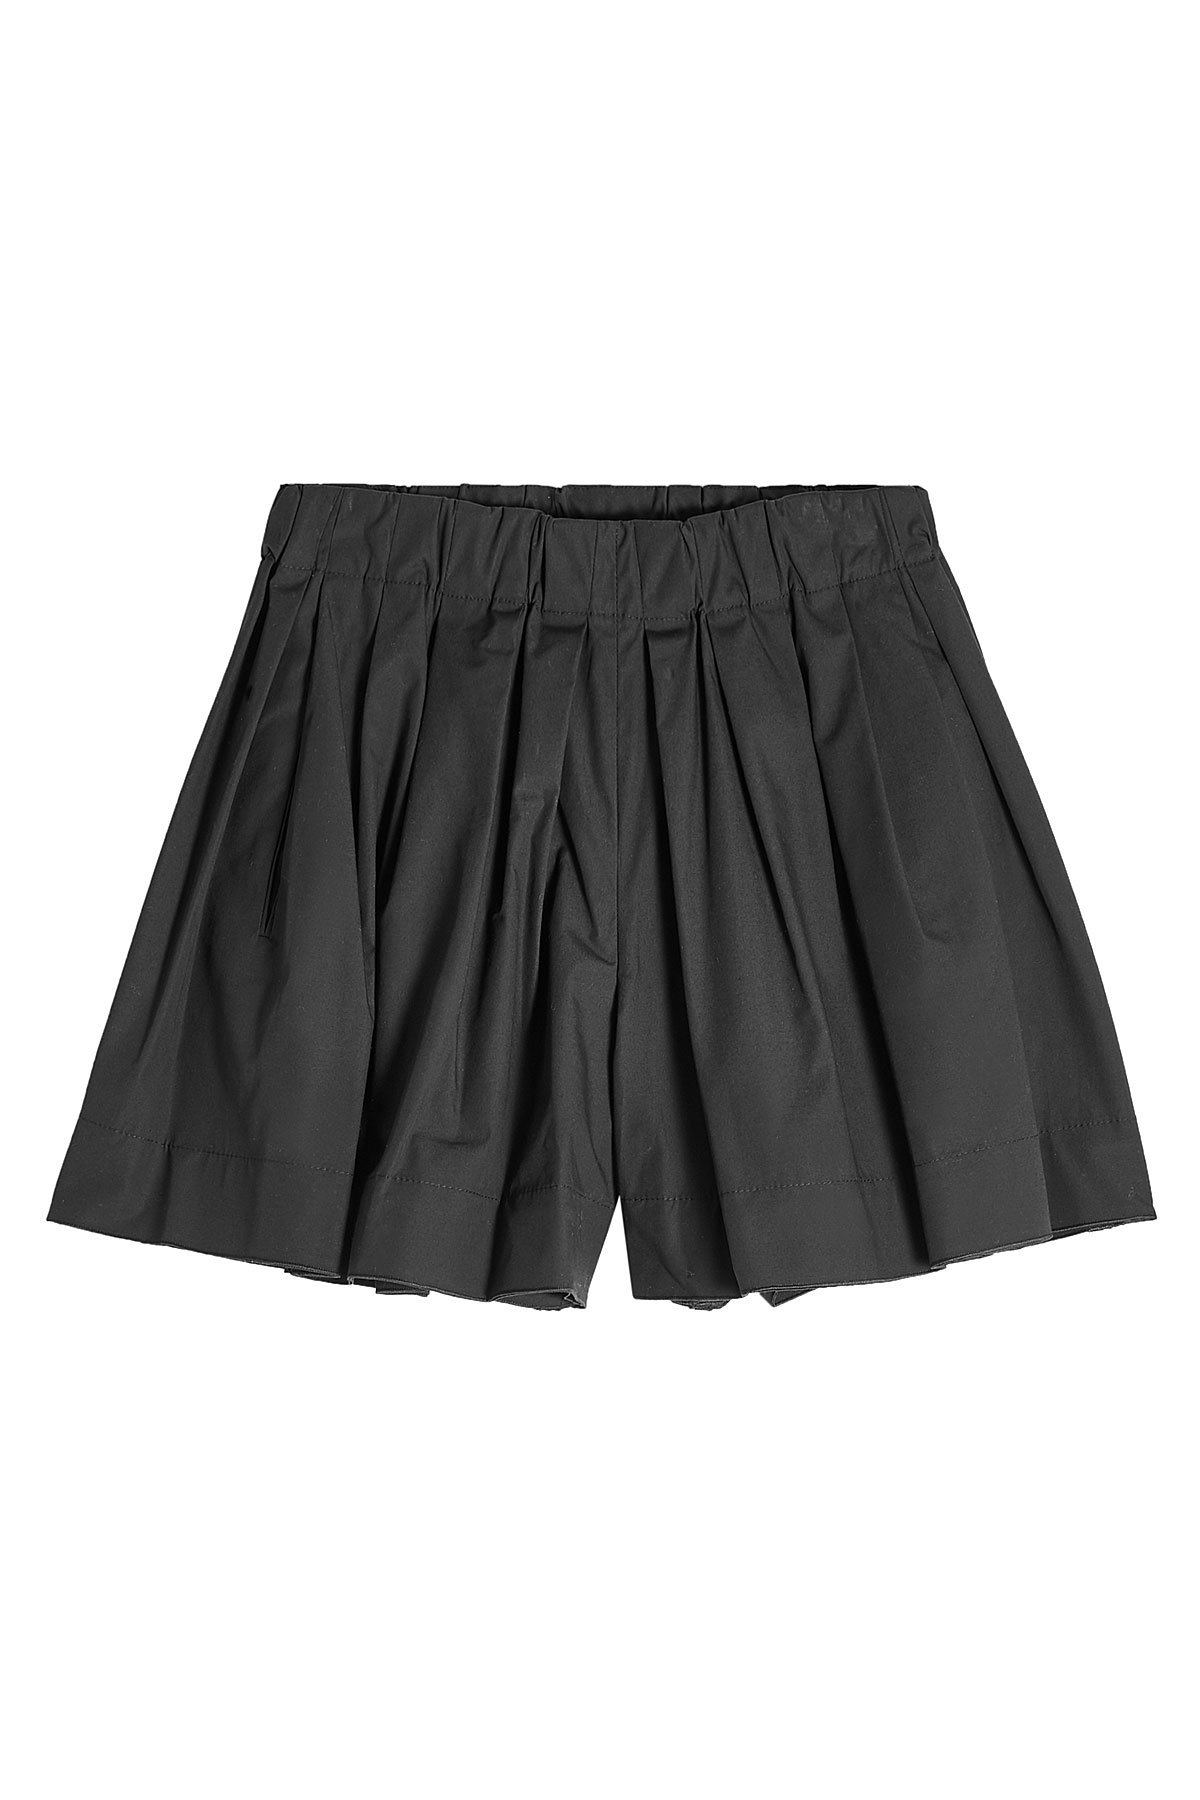 Marc Jacobs - Pleated Shorts with Cotton